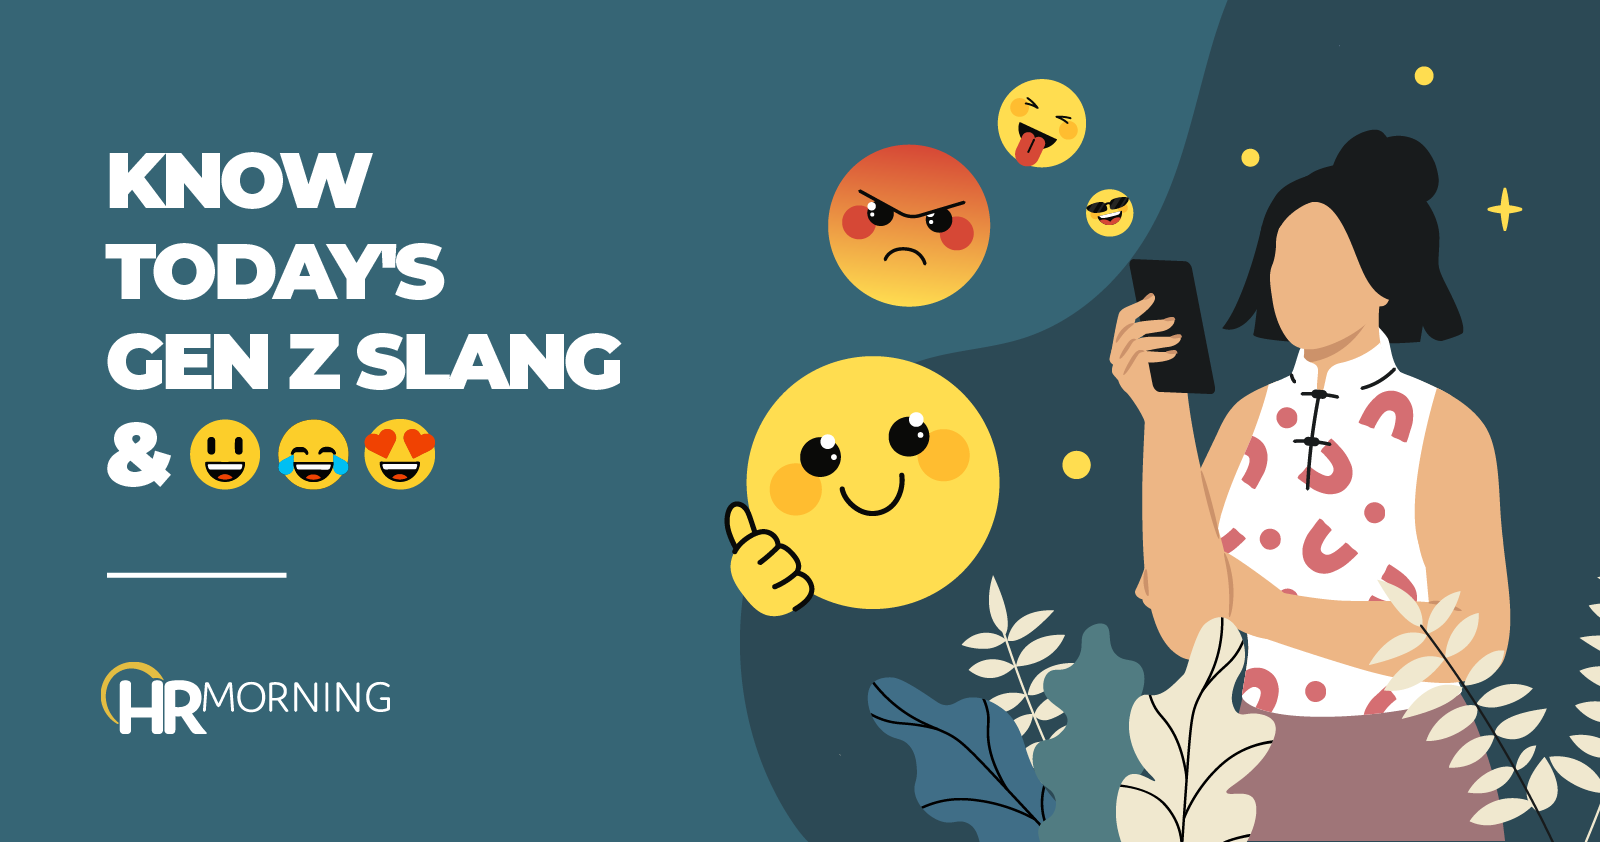 Struggle with Gen Z slang? 2 guides what they say and mean 😜🤣